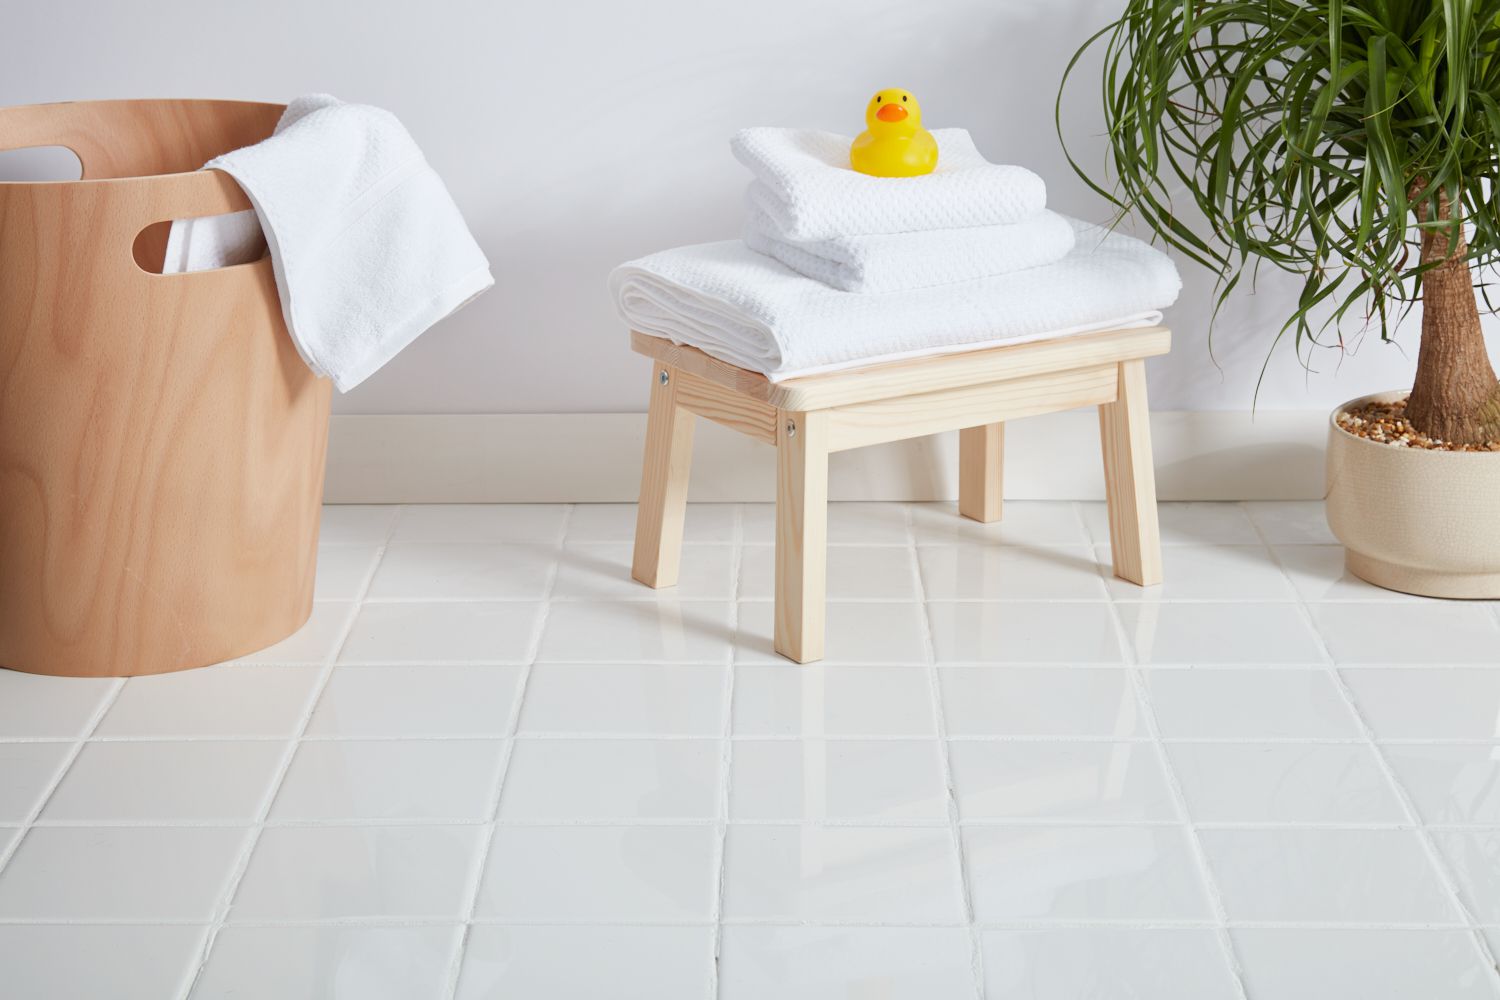 Ceramic Tiles for Floor: Why the Buzz?